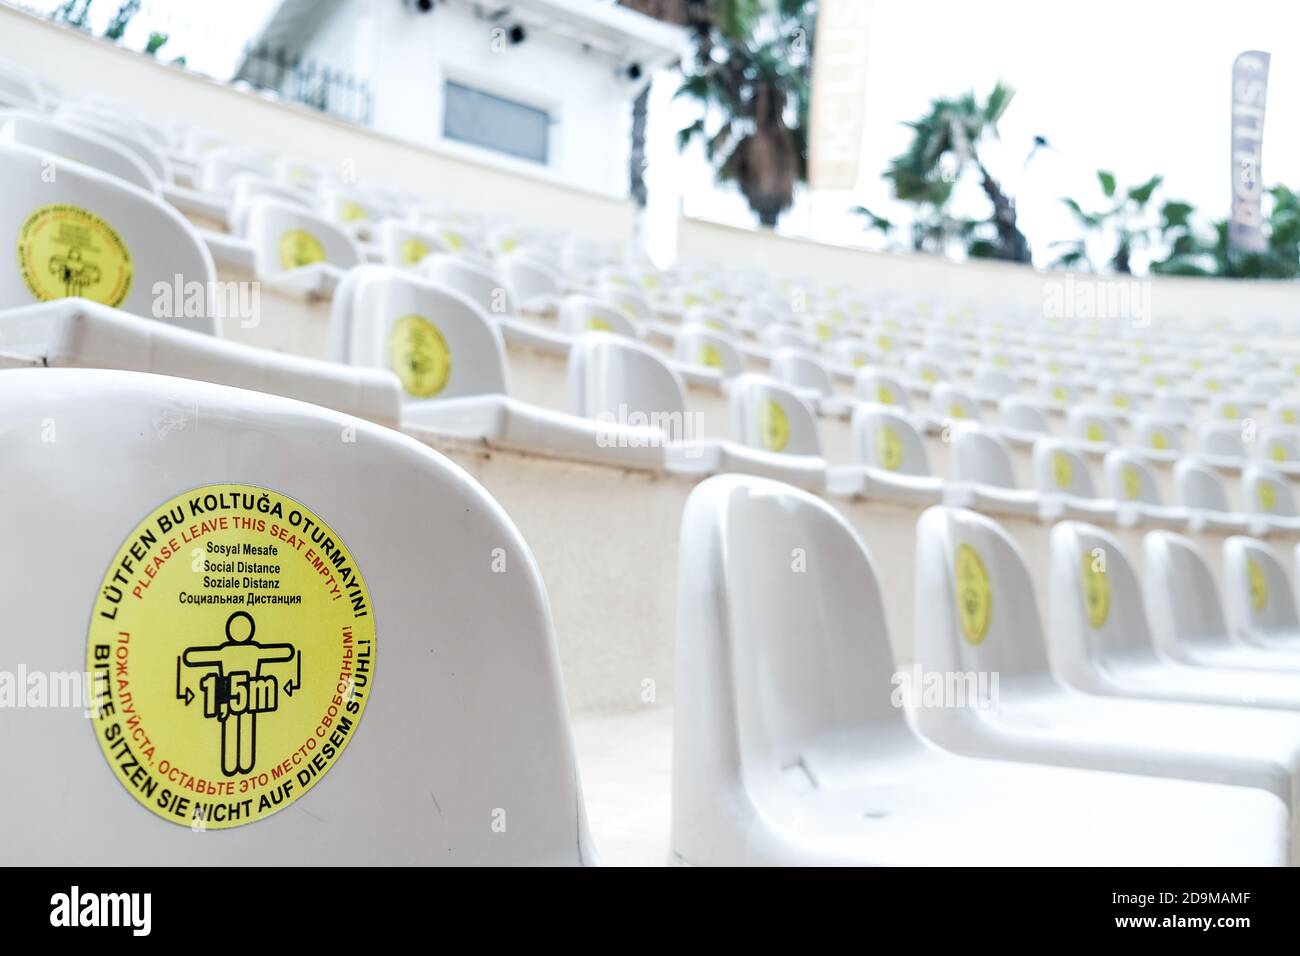 Belek, Turkey - October 2020: Warning sign: leave some seats free for social distancing during coronavirus outbreak. New normal lifestyle in pandemic. Stock Photo